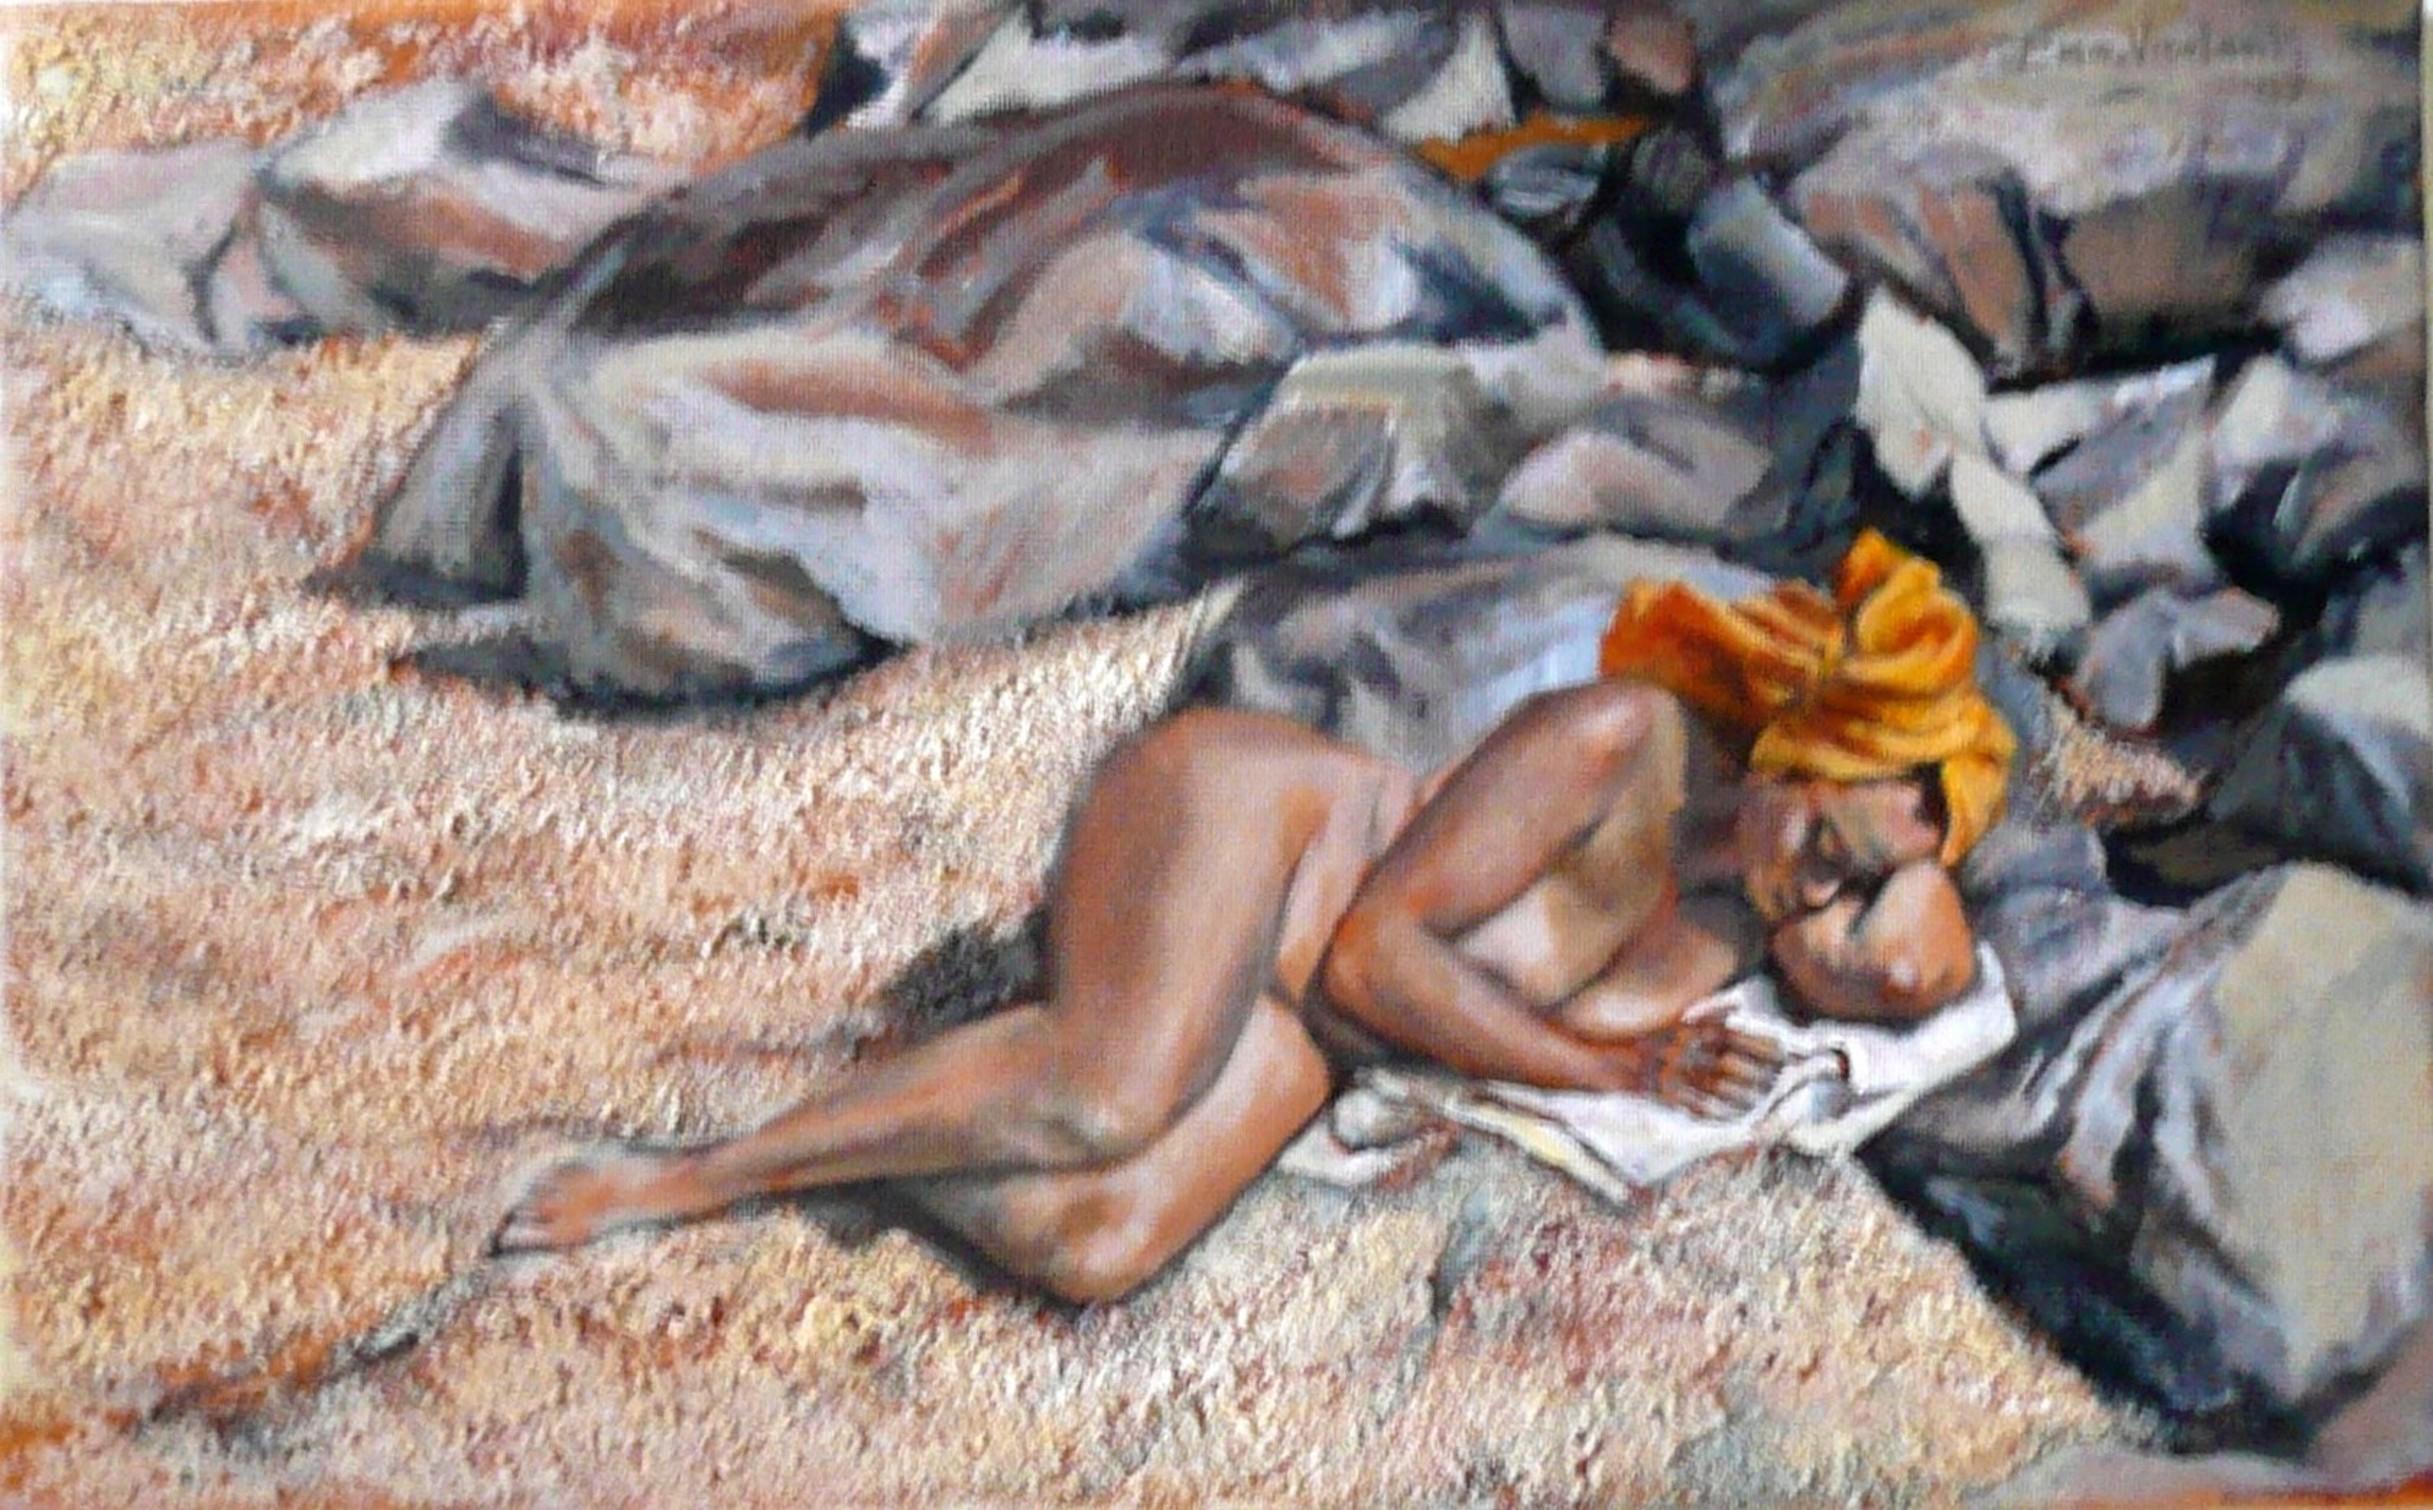 figuratif  "Nap" acrylic linen canvas 22x32cm 2008 french naked nude - Painting by Emmanuelle Vroelant